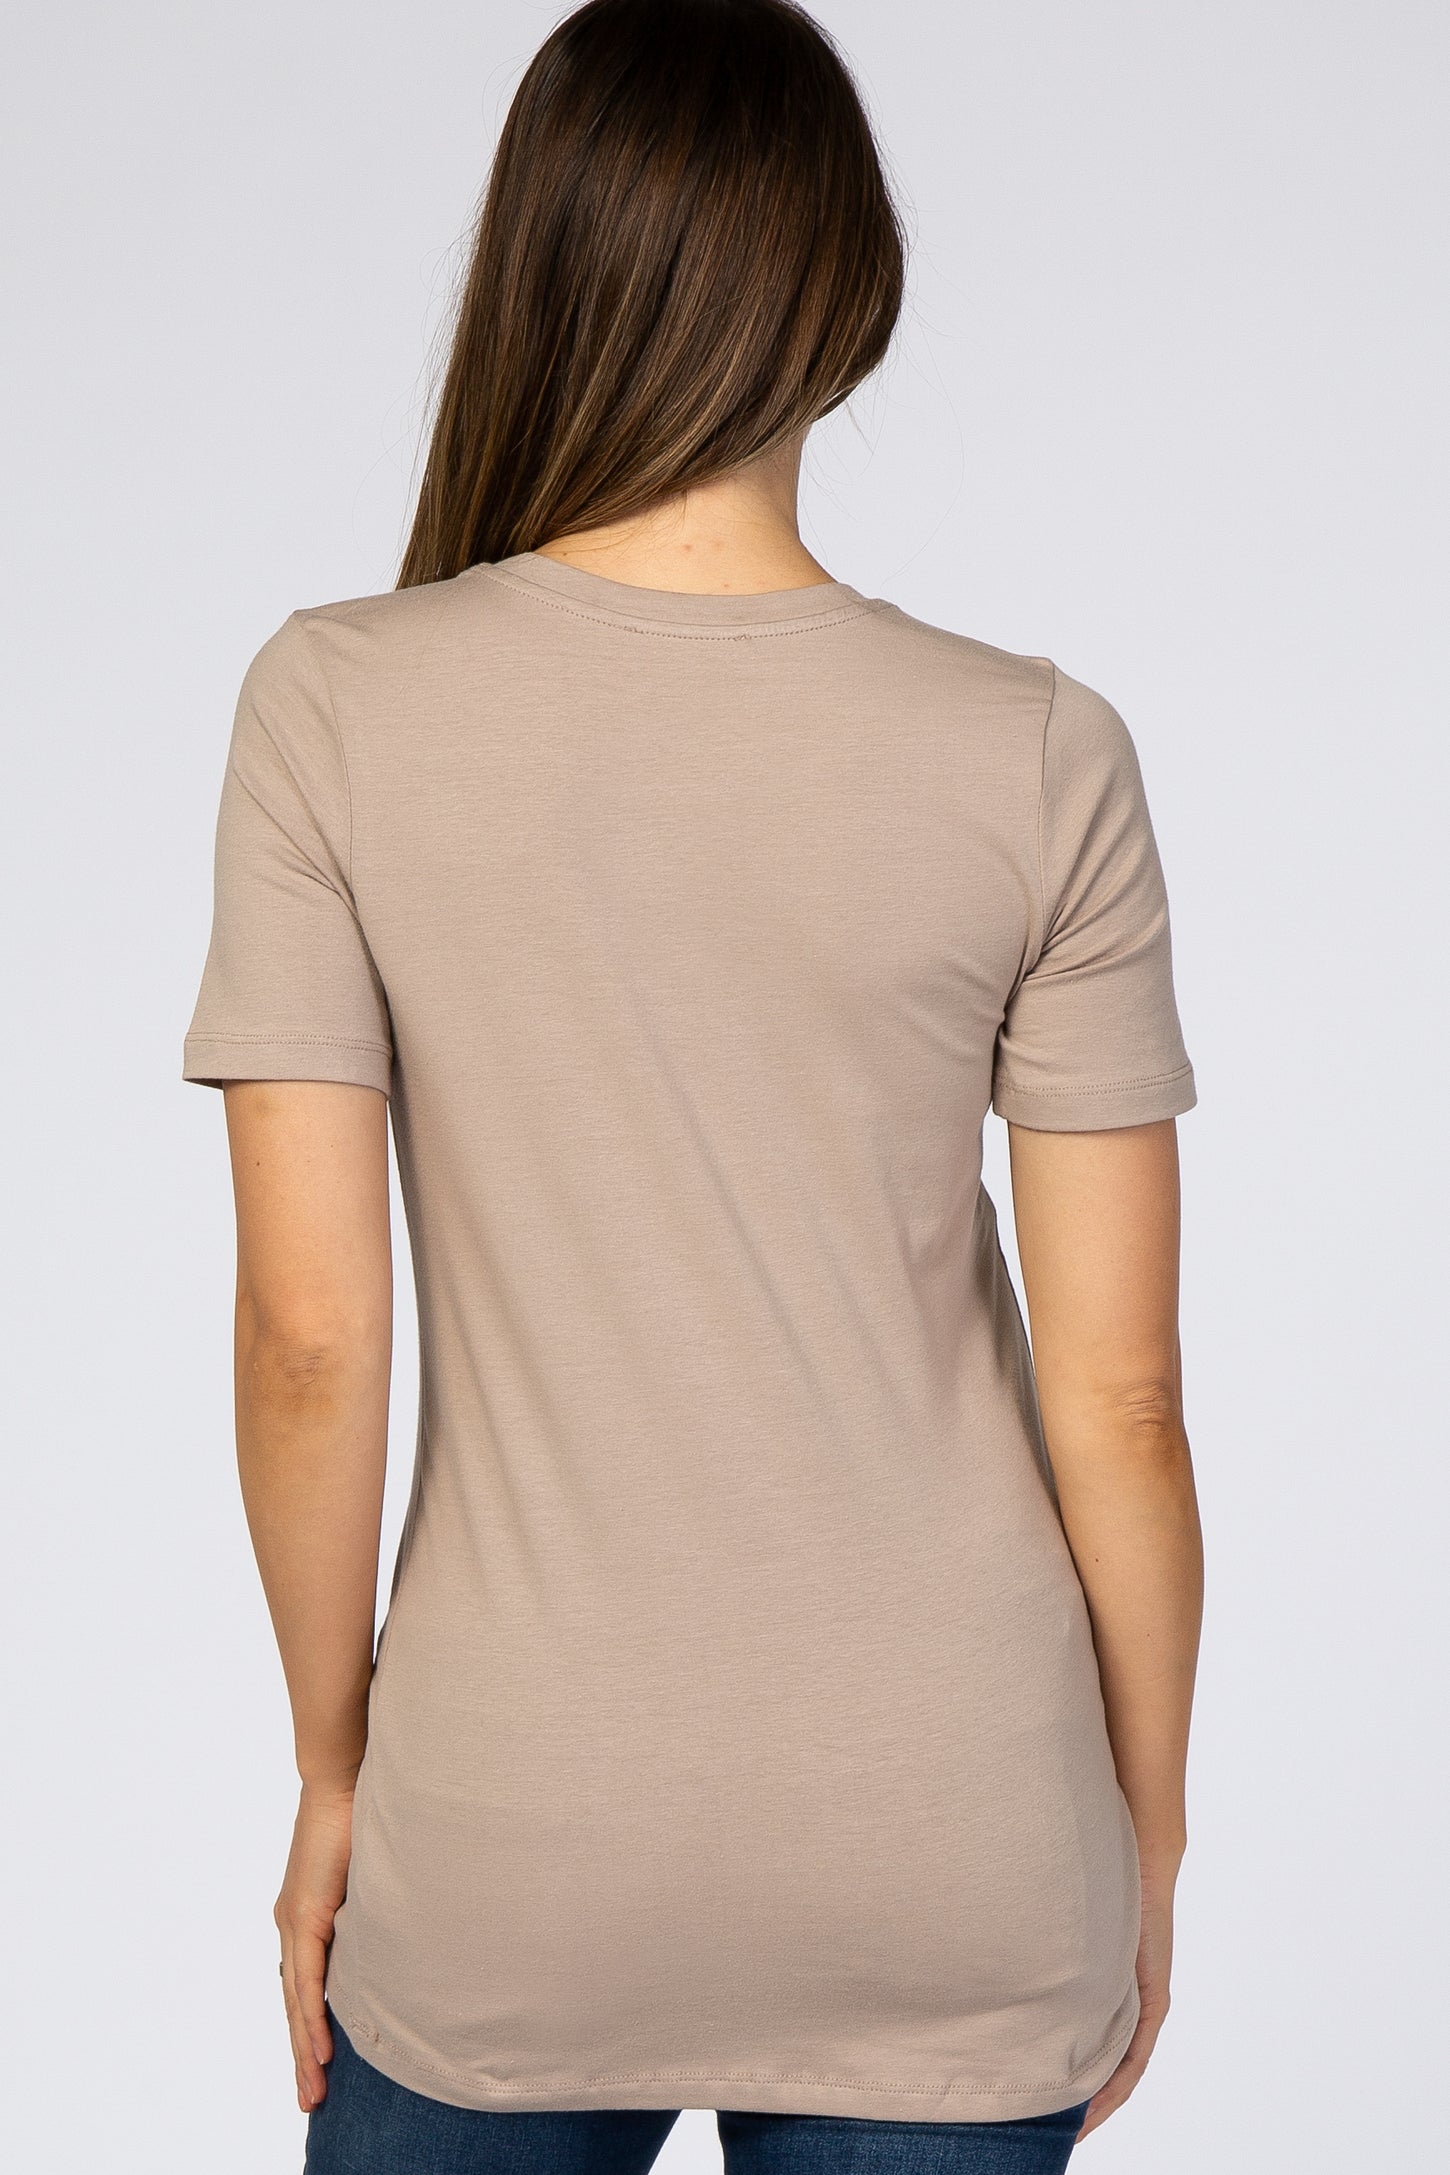 Taupe Crew Neck Short Sleeve Maternity Top